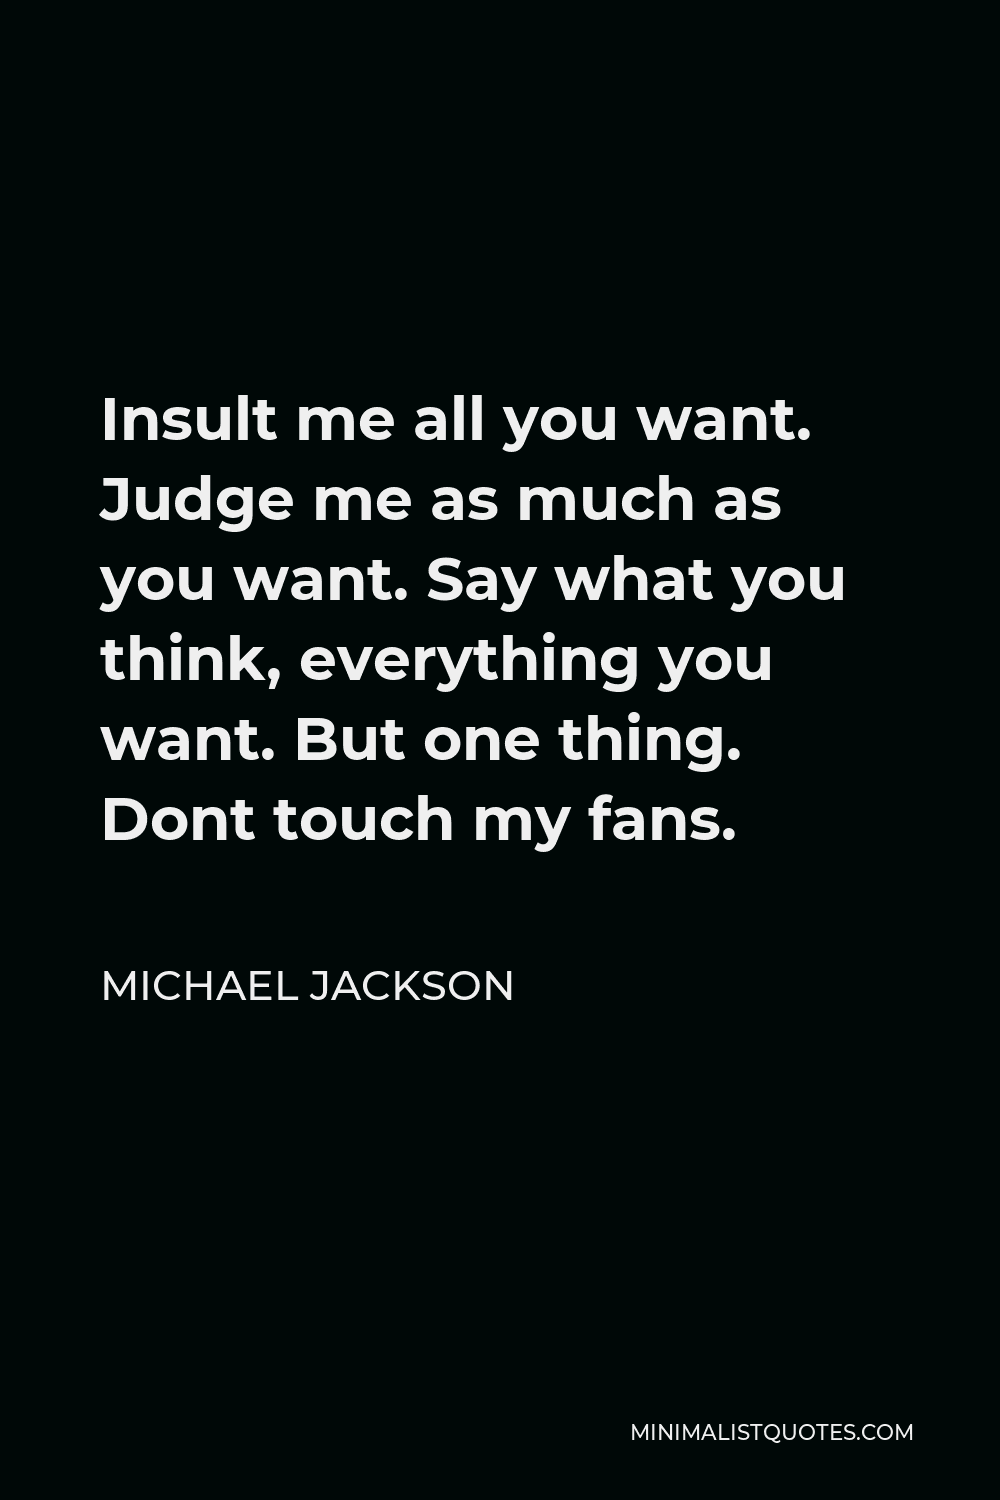 Michael Jackson Quote - Insult me all you want. Judge me as much as you want. Say what you think, everything you want. But one thing. Dont touch my fans.